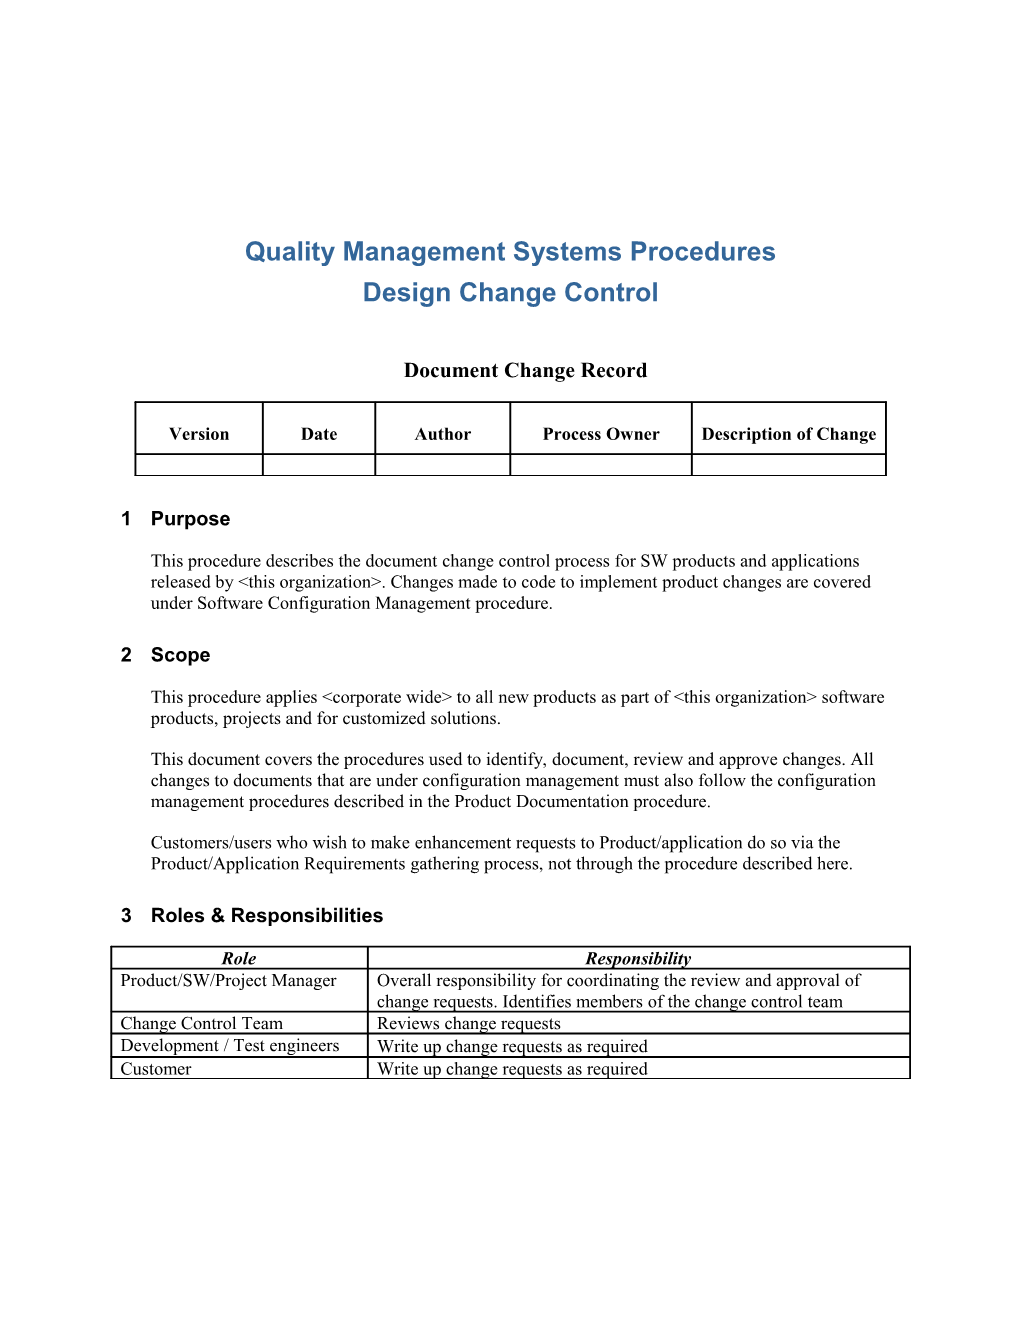 Quality Management Systems Procedures